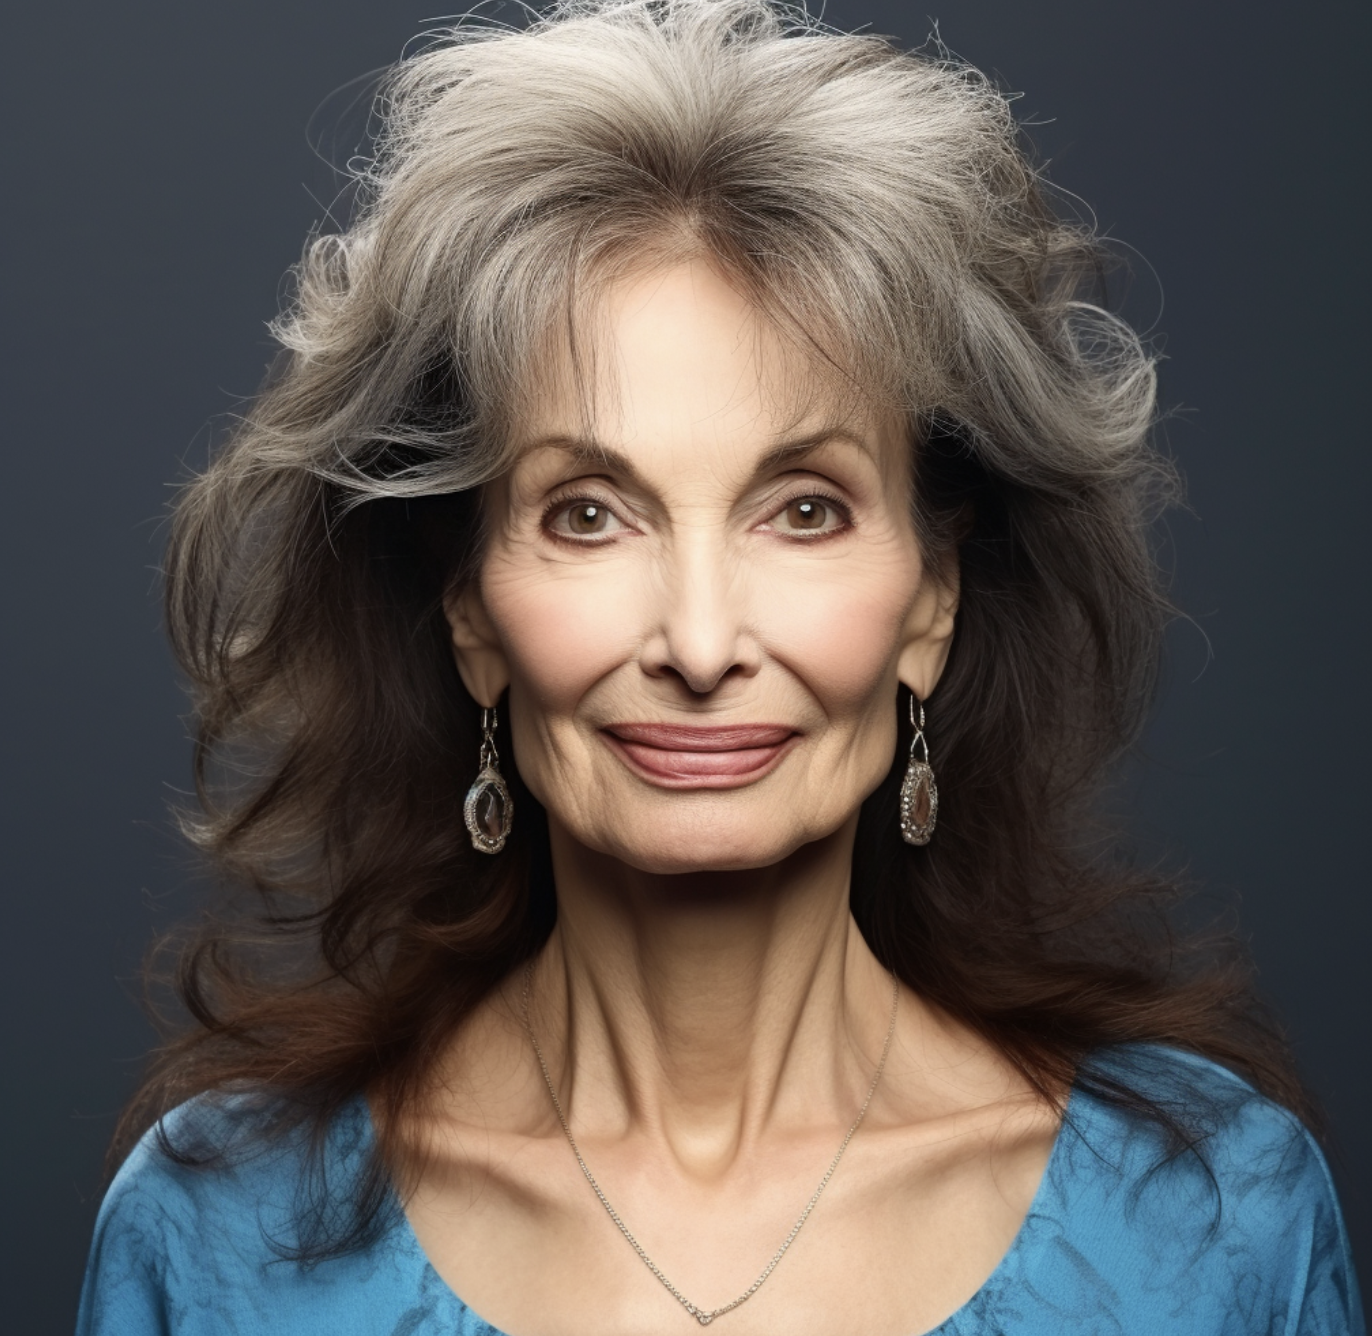 Susan Lucci in her 70s to 80s via AI | Source: Midjourney